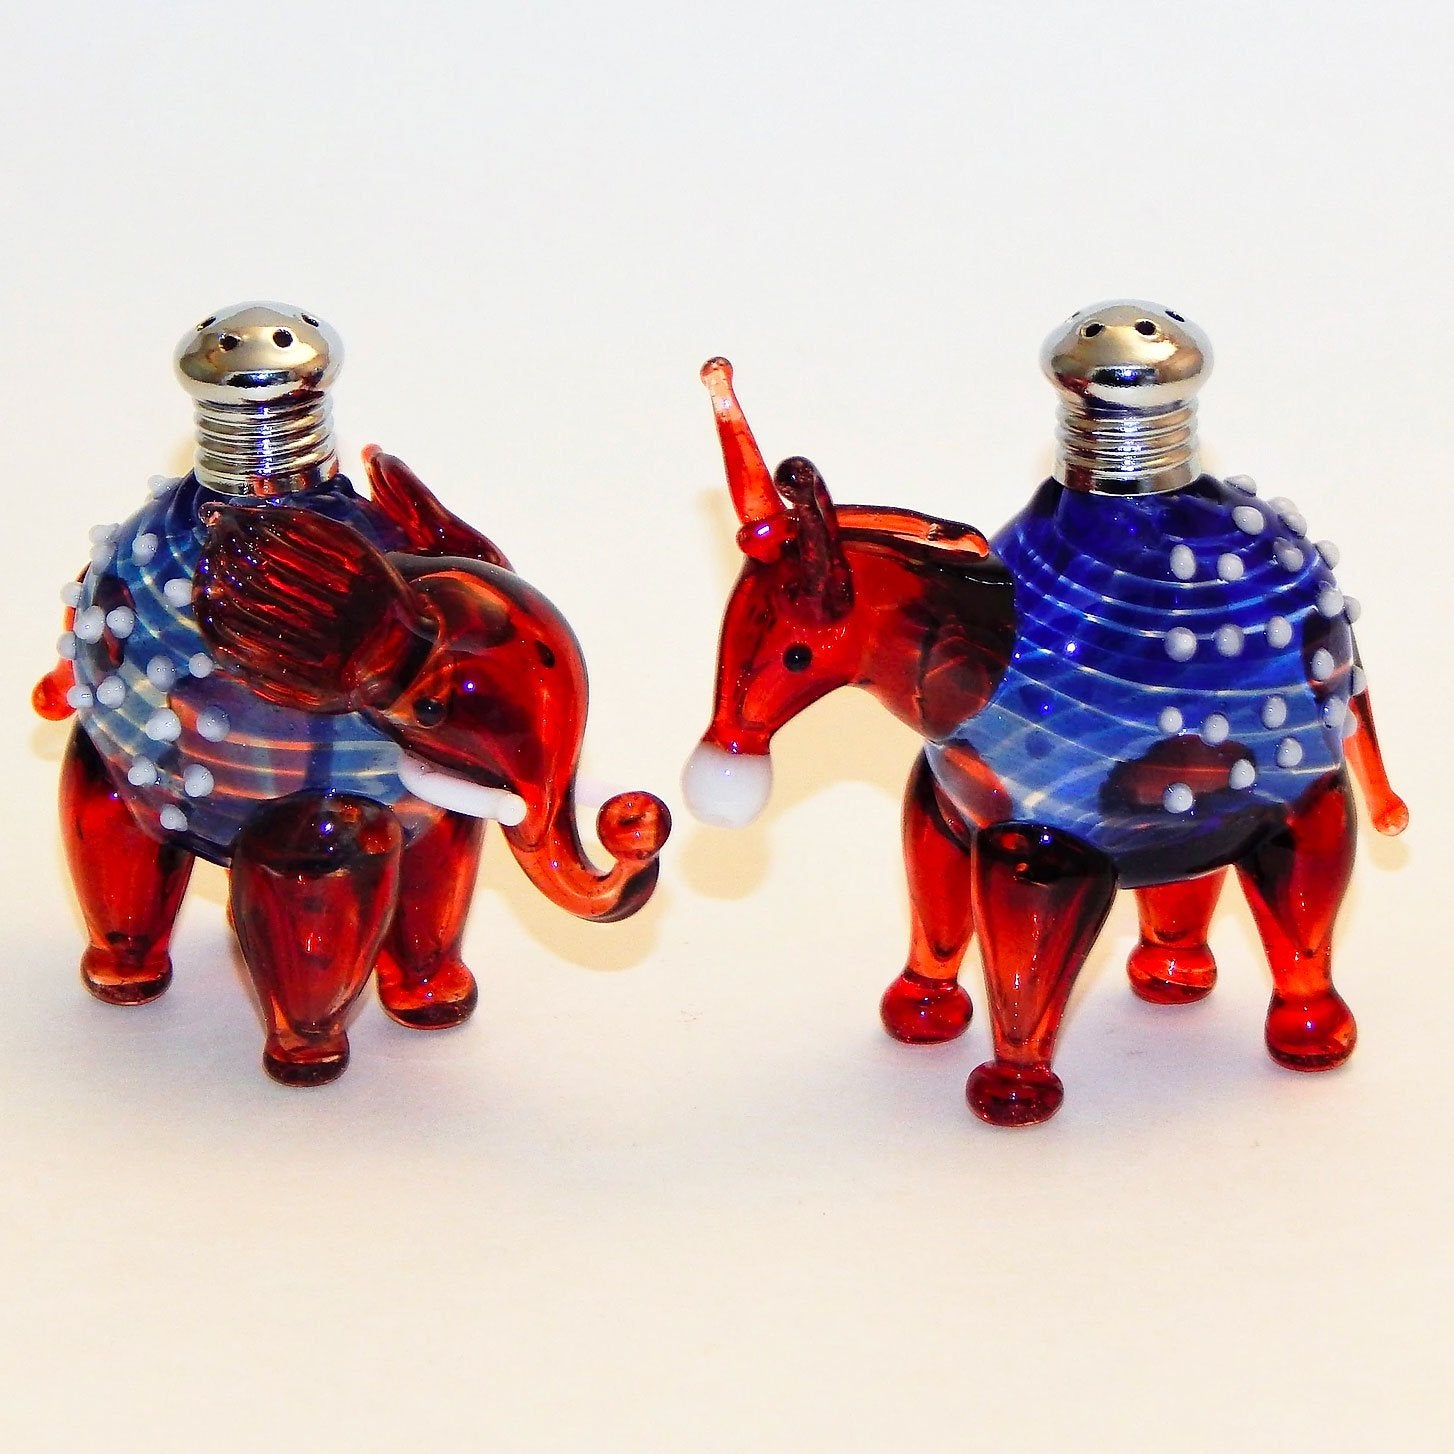 https://www.sweetheartgallery.com/cdn/shop/products/Four-Sisters-Art-Glass-Donkey-and-Elephant-Mix-and-Match-275-Salt-and-Pepper-Shaker-Artistic-Handblown-Glass-Salt-and-Pepper-Shakers.jpg?v=1589924245